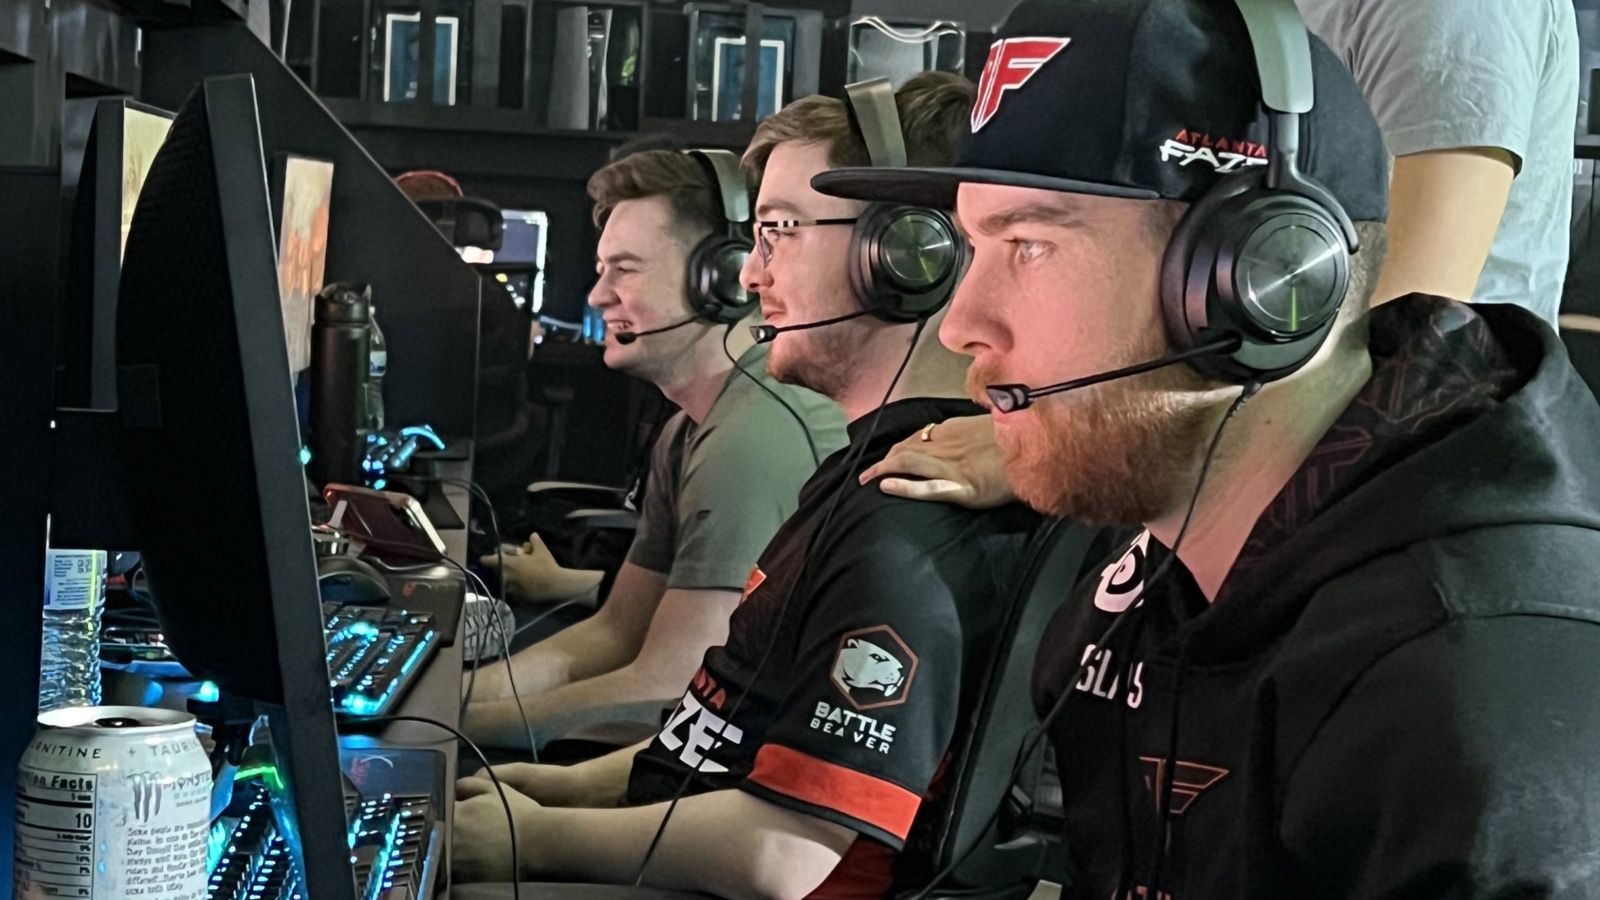 Atlanta FaZe players attacked in airsoft drive-by shooting during CDL Major 4 – Egaxo